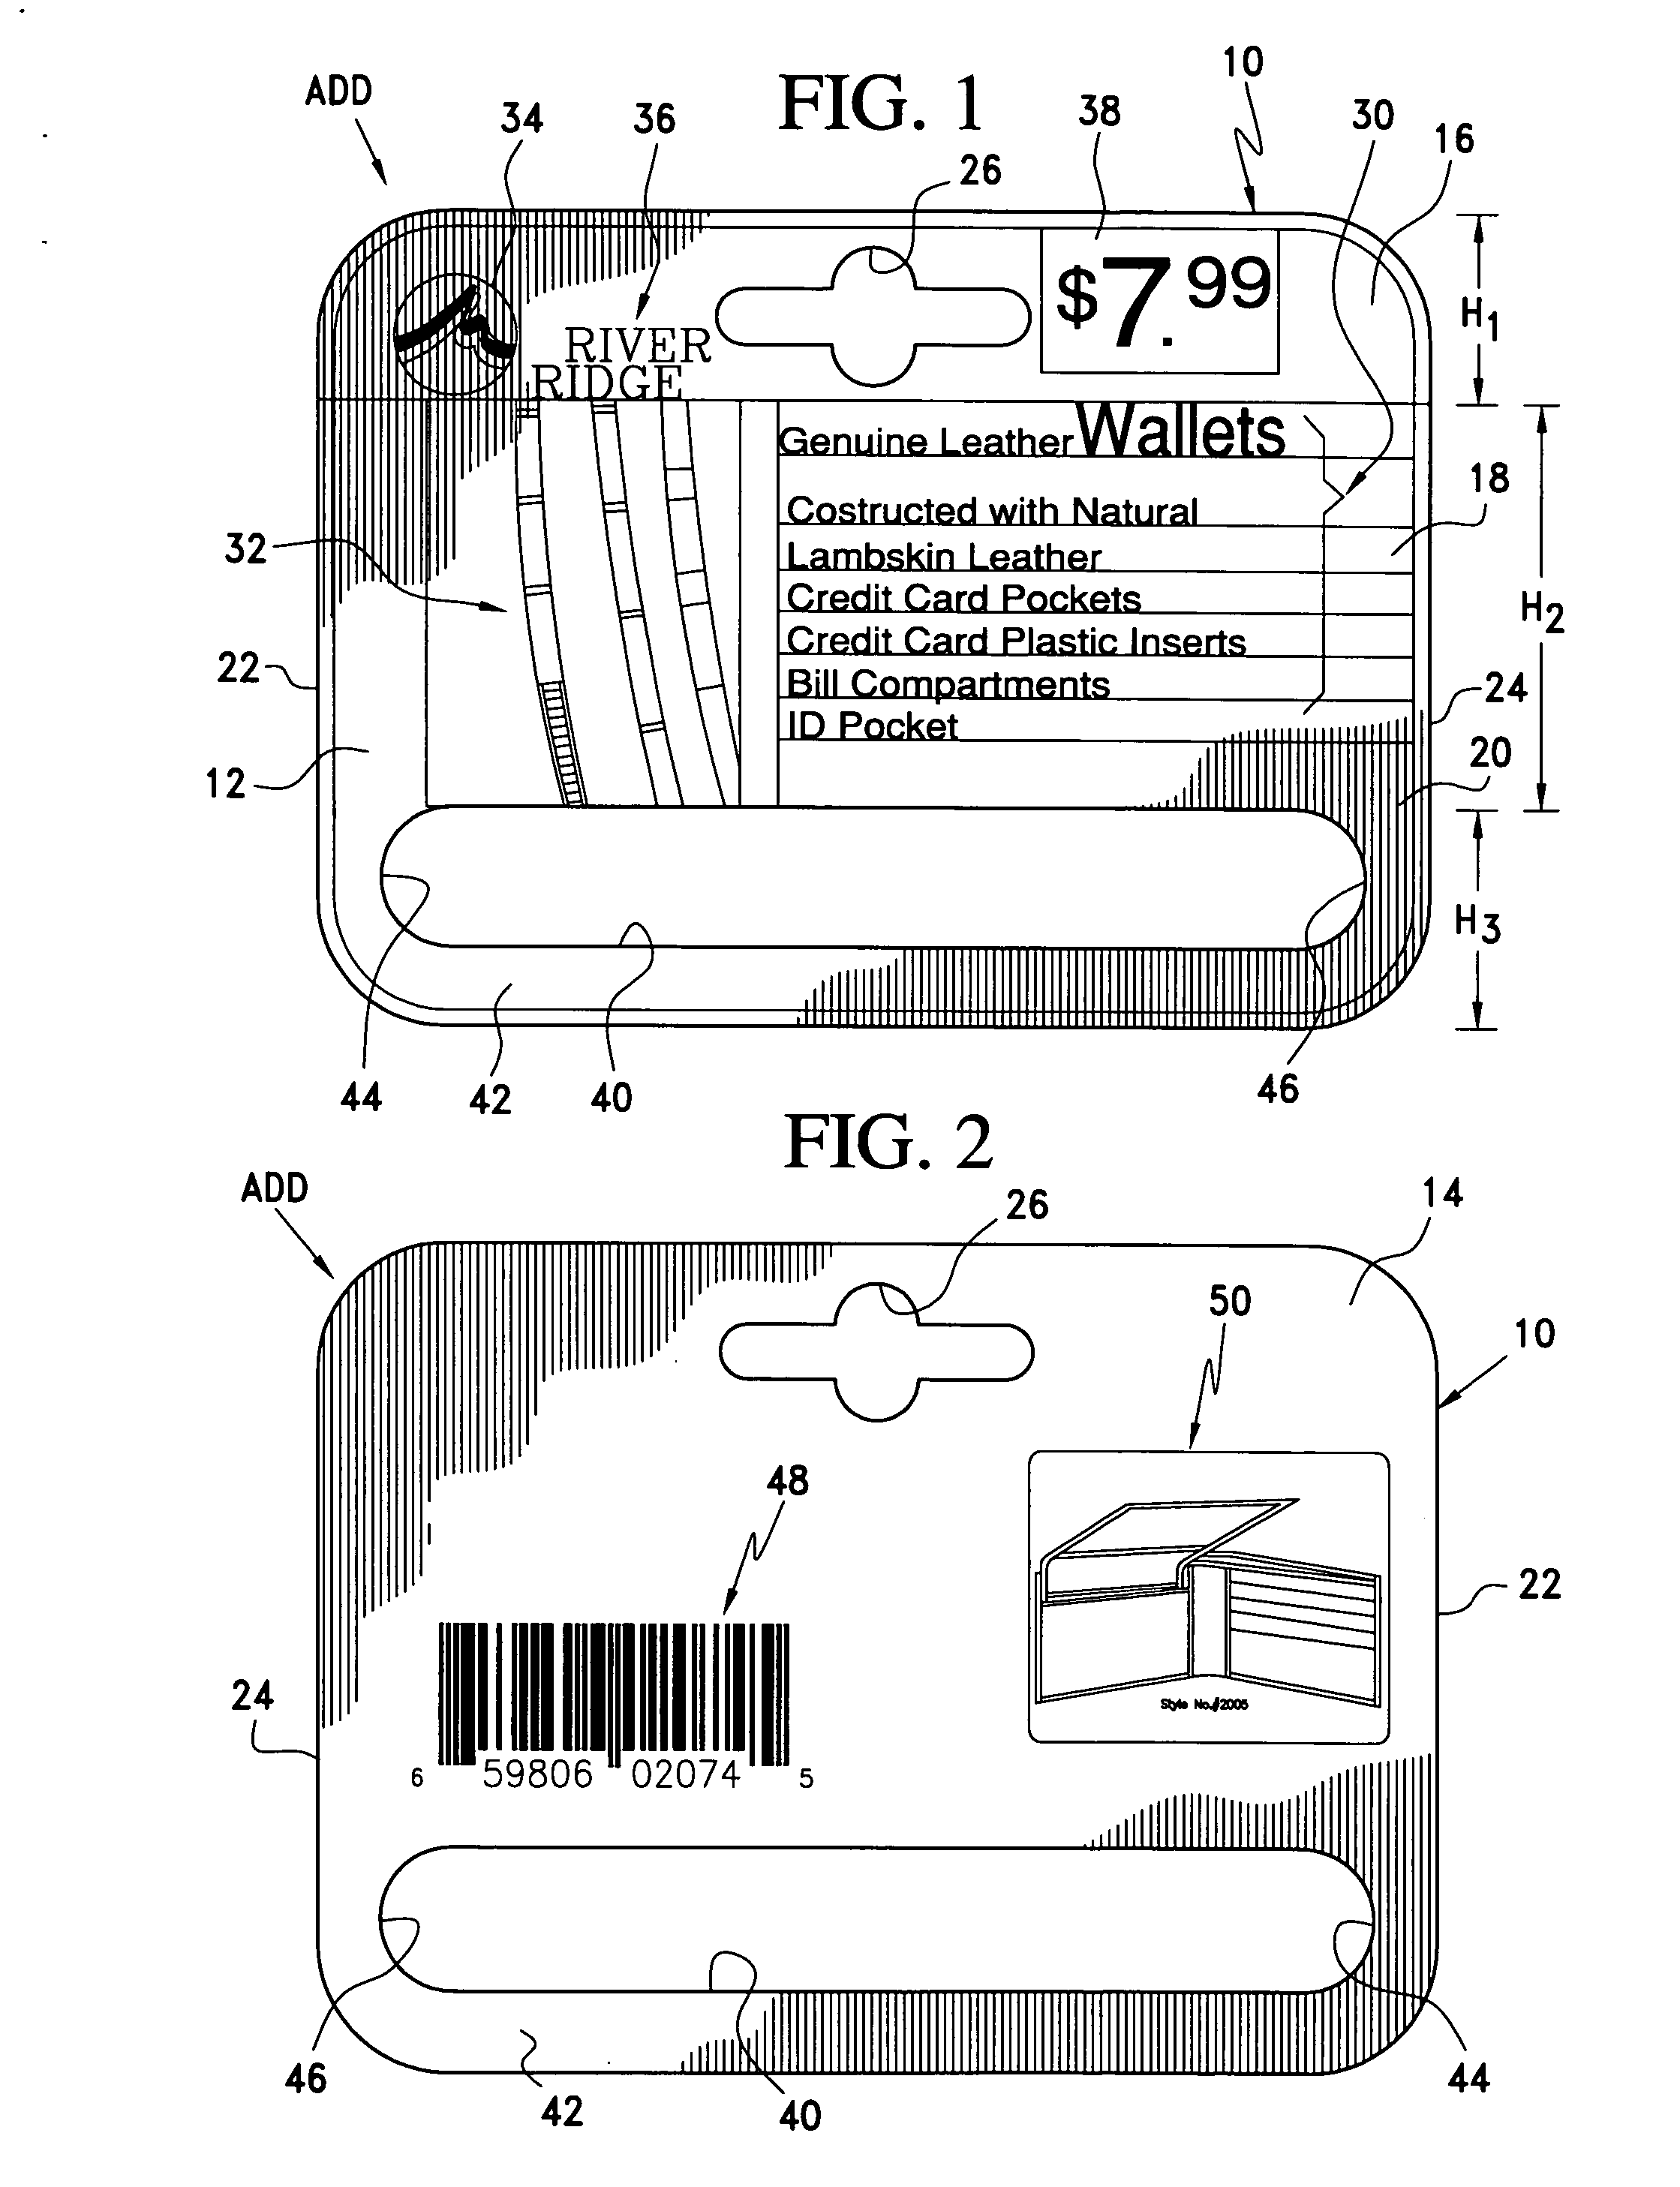 Article display device